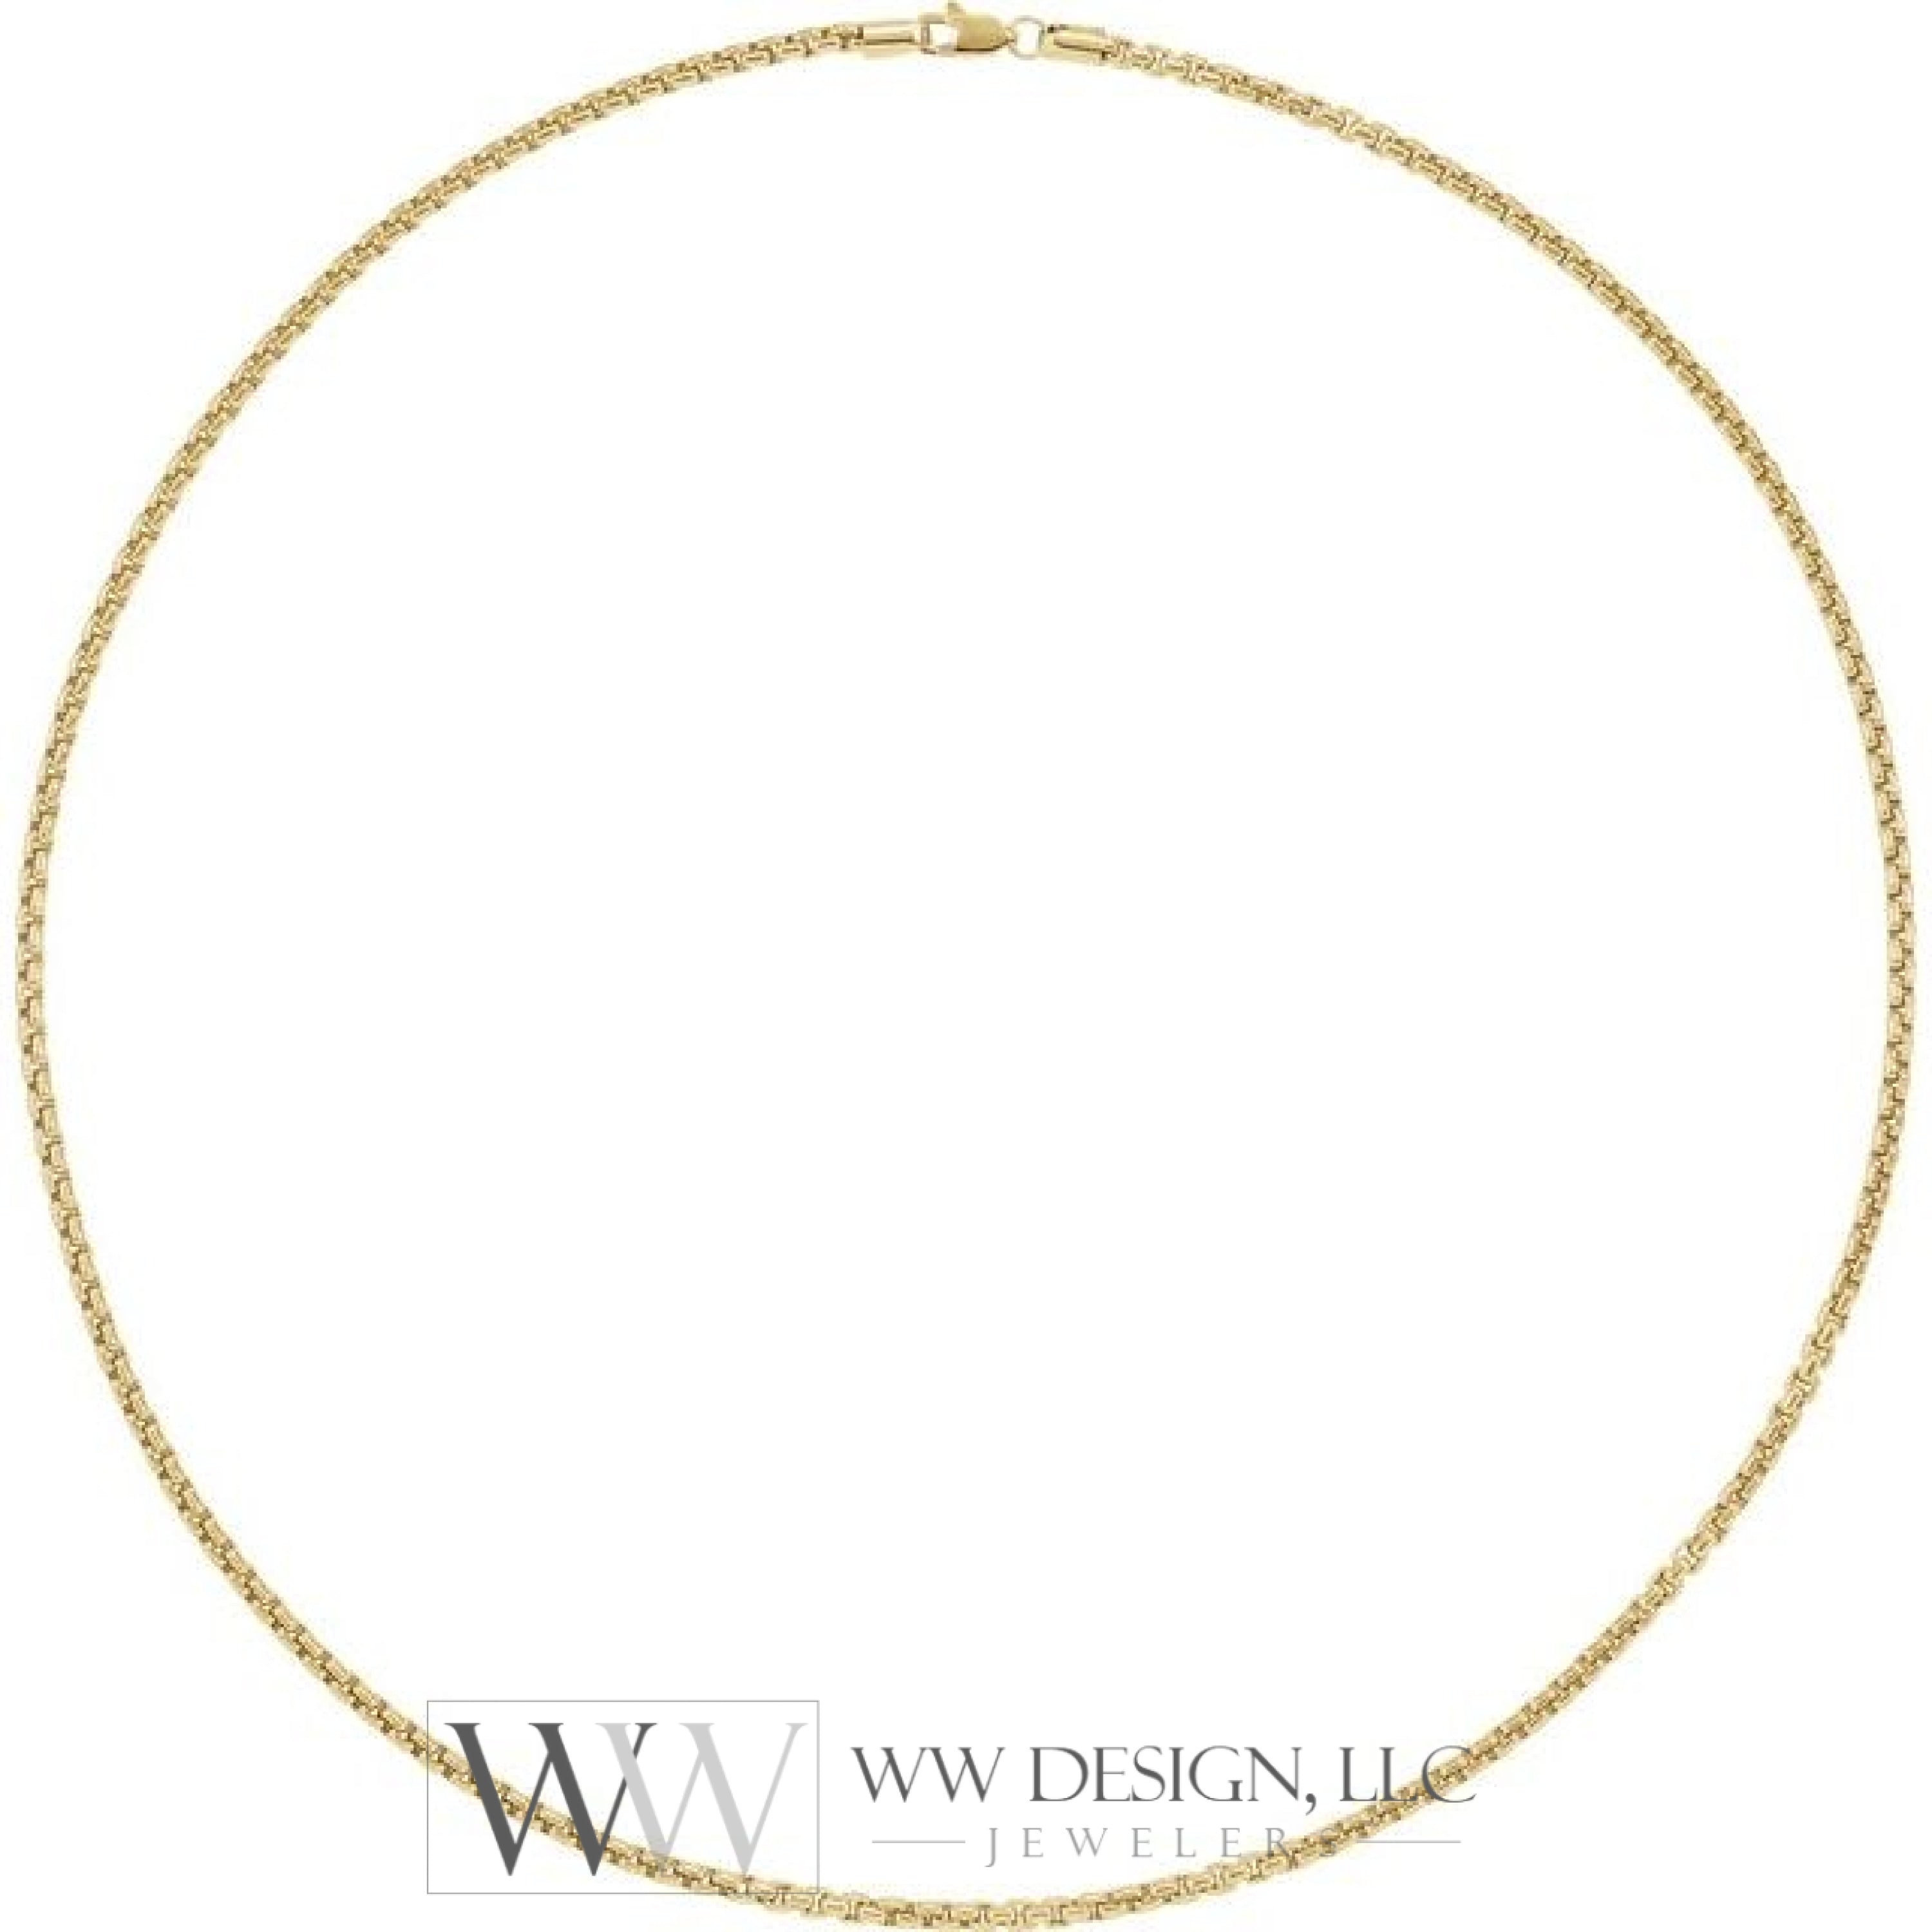 2.6mm Rounded Box Chain Bracelet or Necklace - 14k Gold (Y, W, R), or Sterling Silver